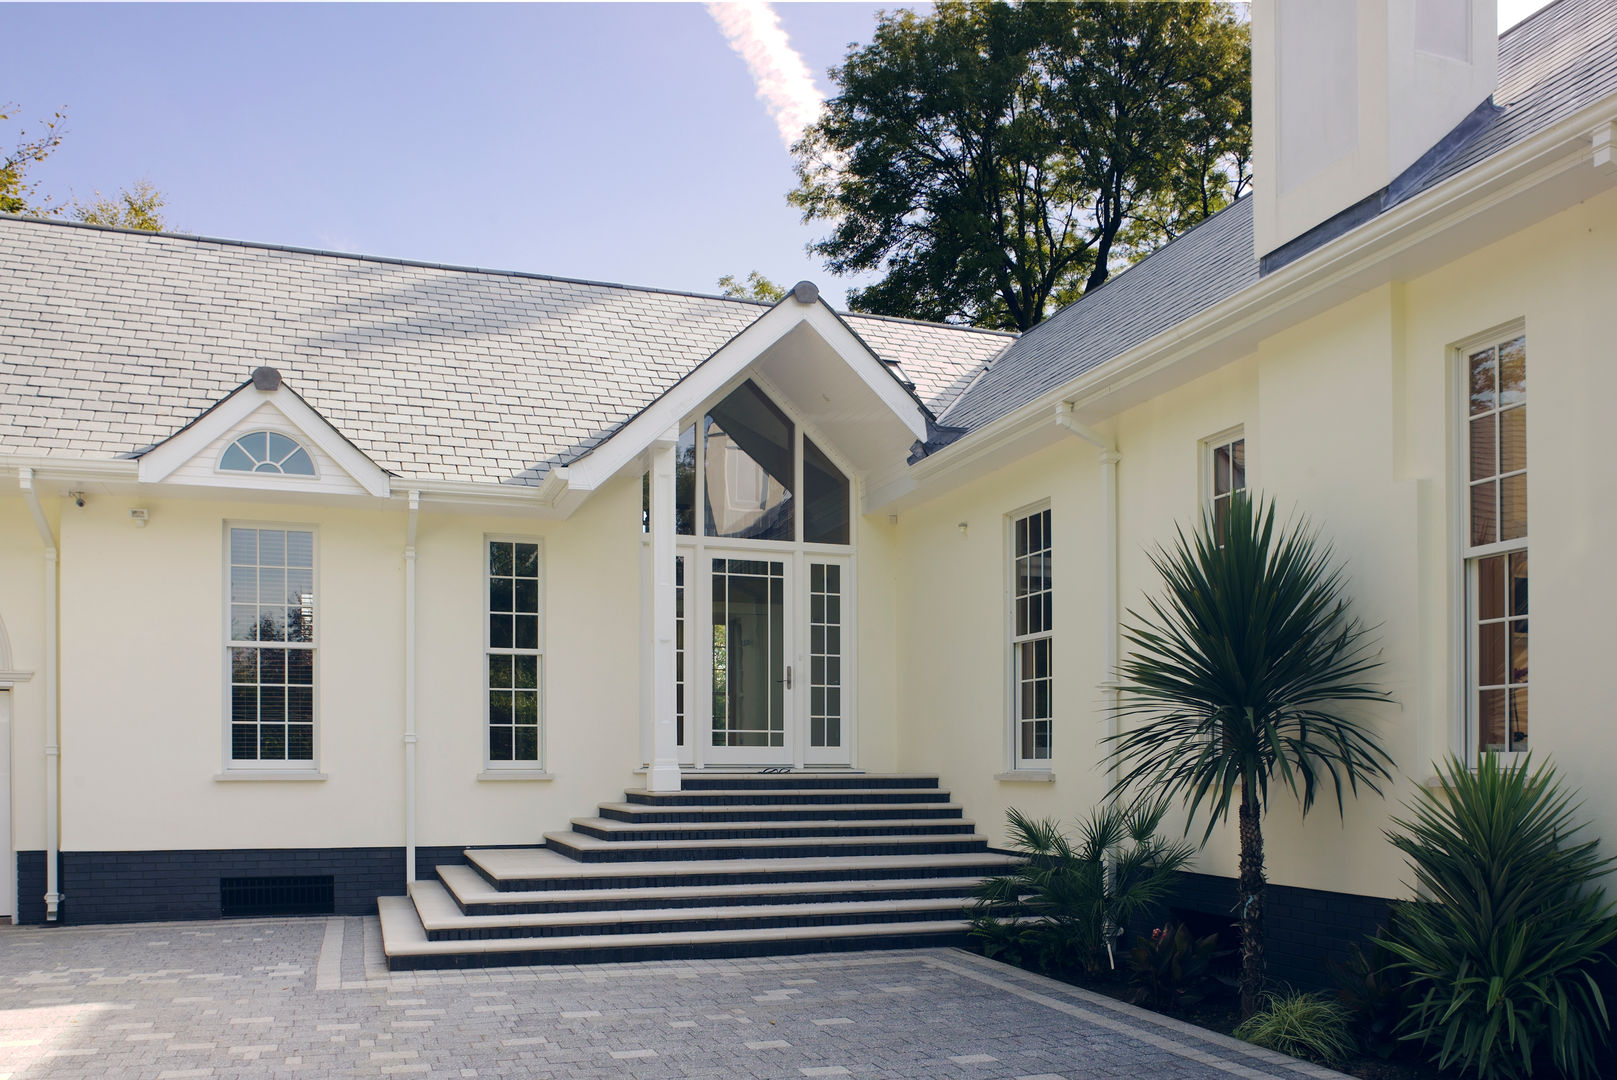 Neo Classical Design For New Build Family Home, Marvin Windows and Doors UK Marvin Windows and Doors UK Windows